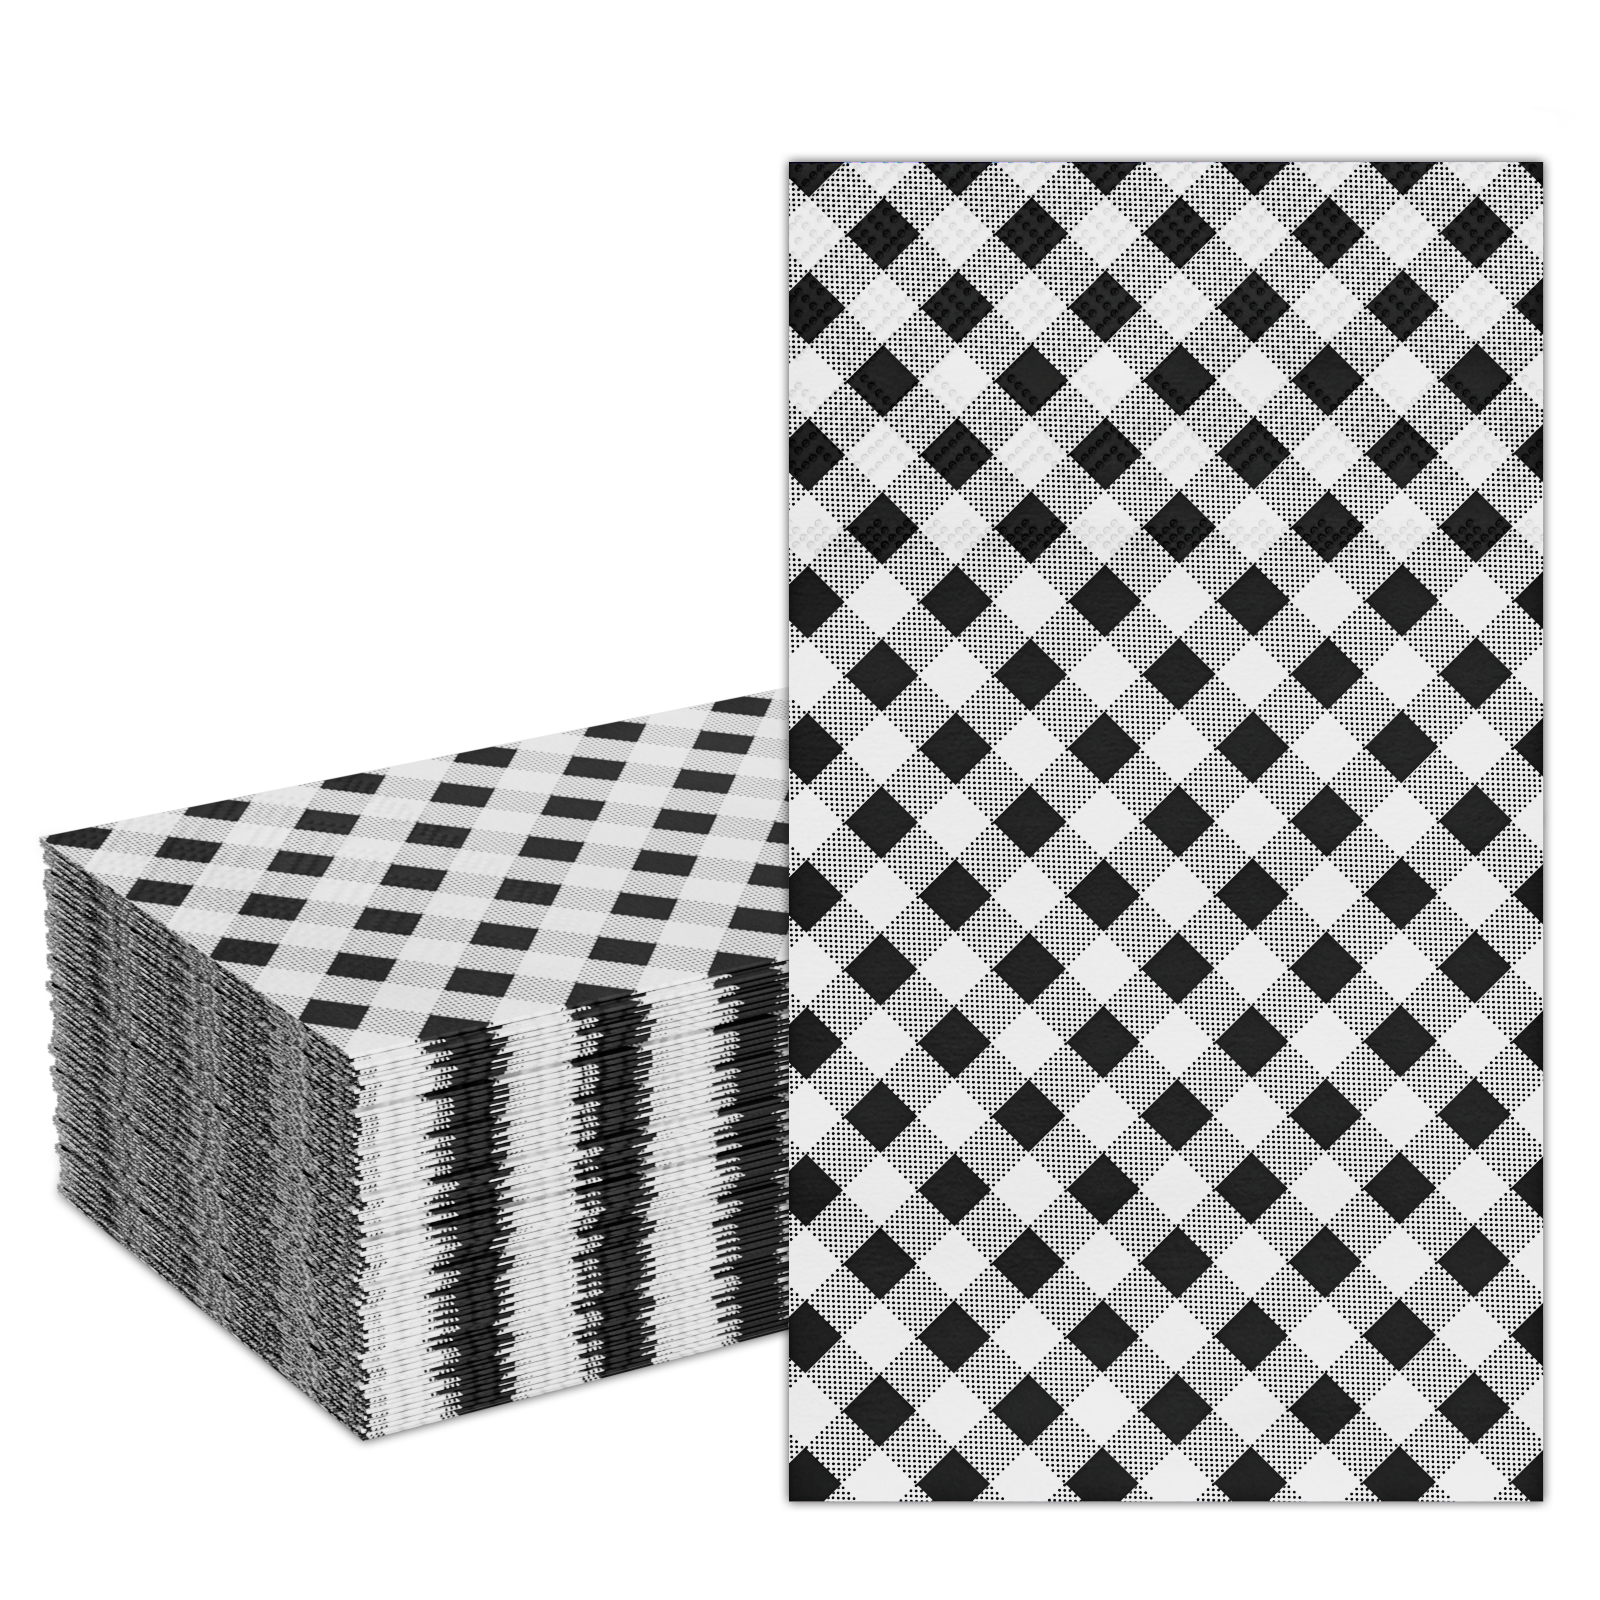 DYLIVeS 50 Count Gingham Guest Napkins 3 Ply Disposable Paper Dinner Hand Napkin for Bathroom Powder Room Holiday Wedding Birthday Party Bridaland Baby Shower Decorative Towels - image 1 of 7